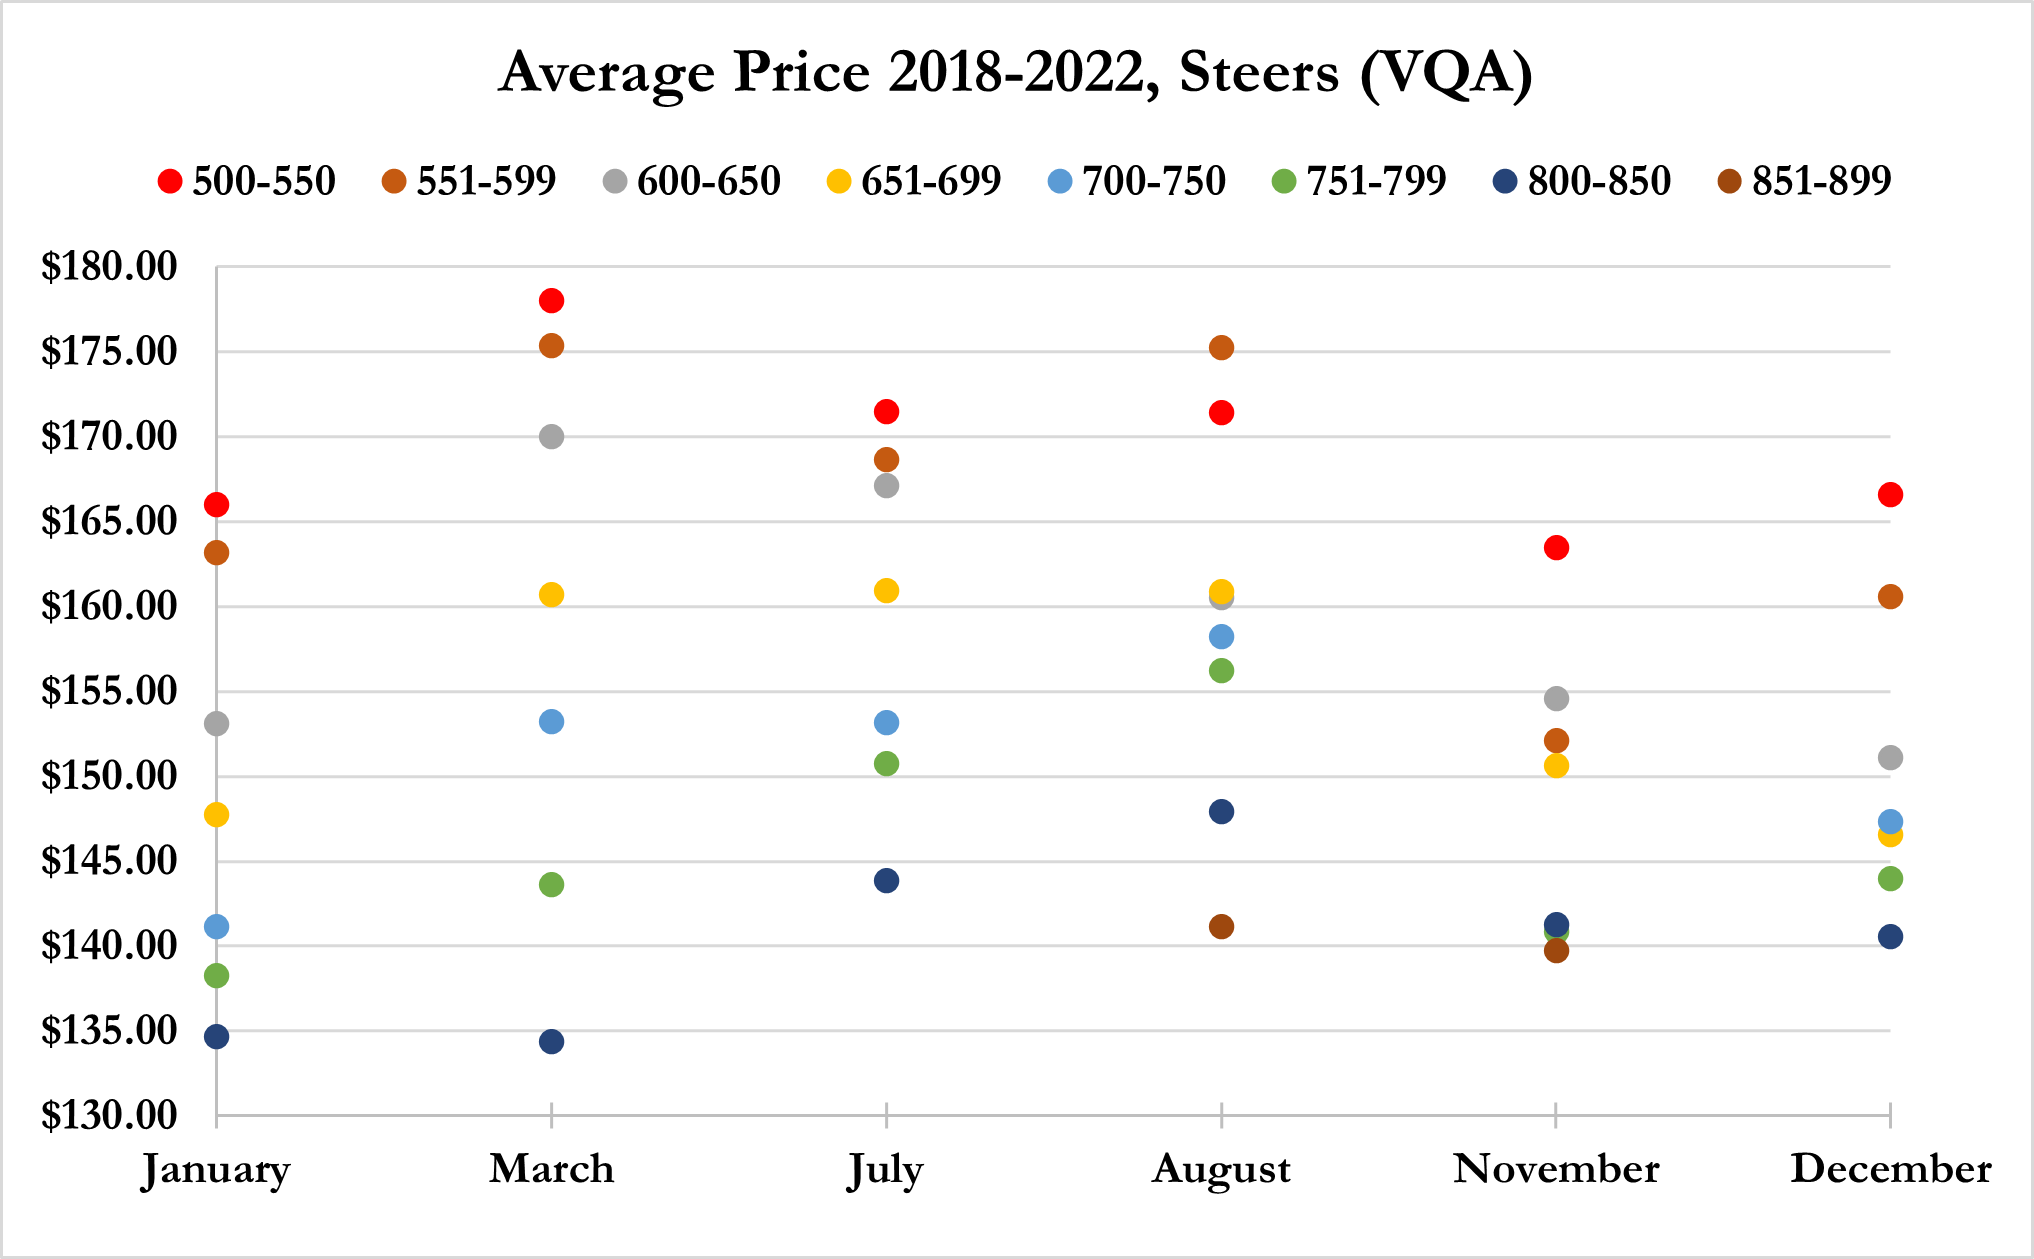 Average price for steers 2018-2022